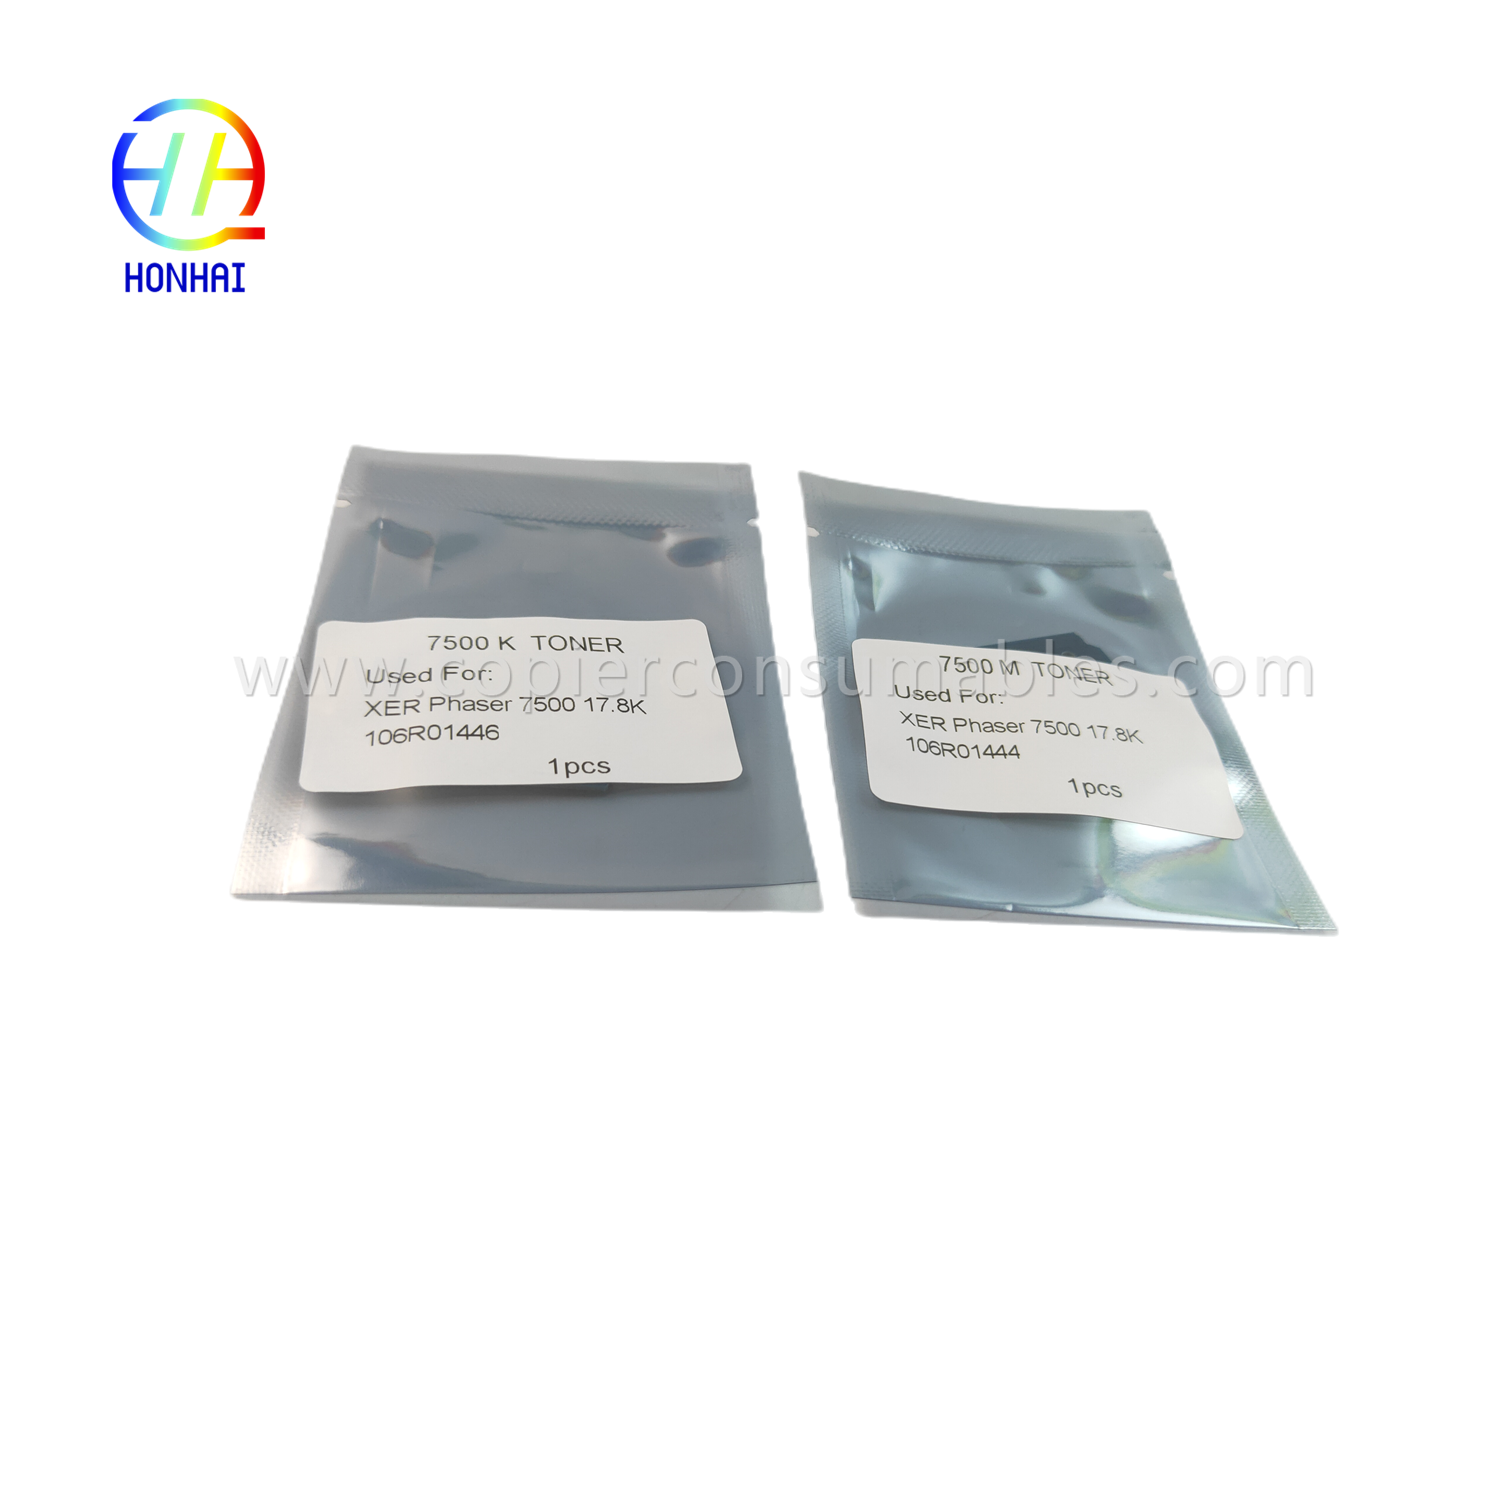 https://www.copierconsumables.com/toner-cartridge-chip-for-xerox-7500-7500n-7500dn-7500dt-106r01444-106r01446-toner-chip-product/